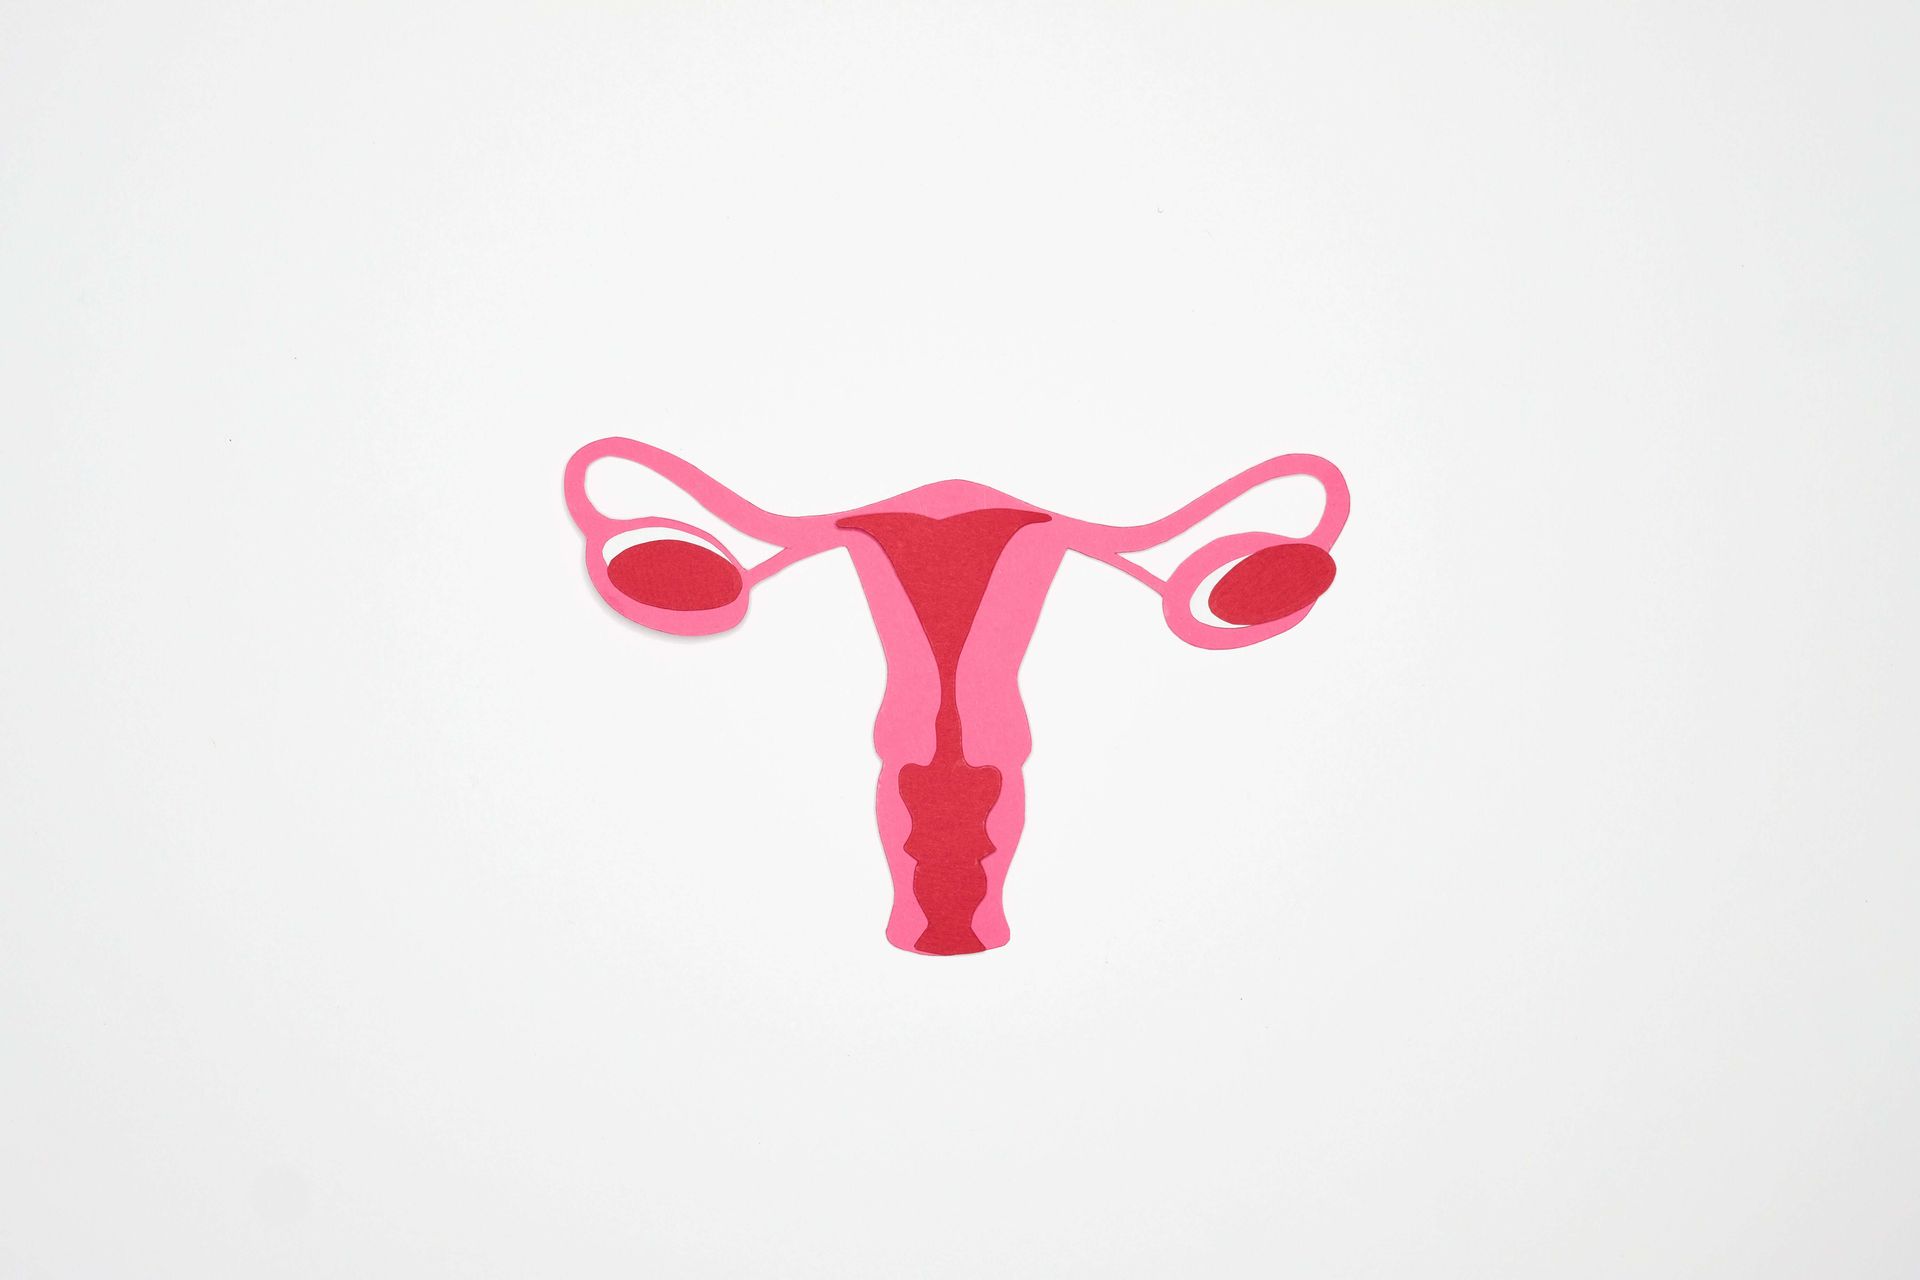 bulky uterus - symptoms, causes and treatment